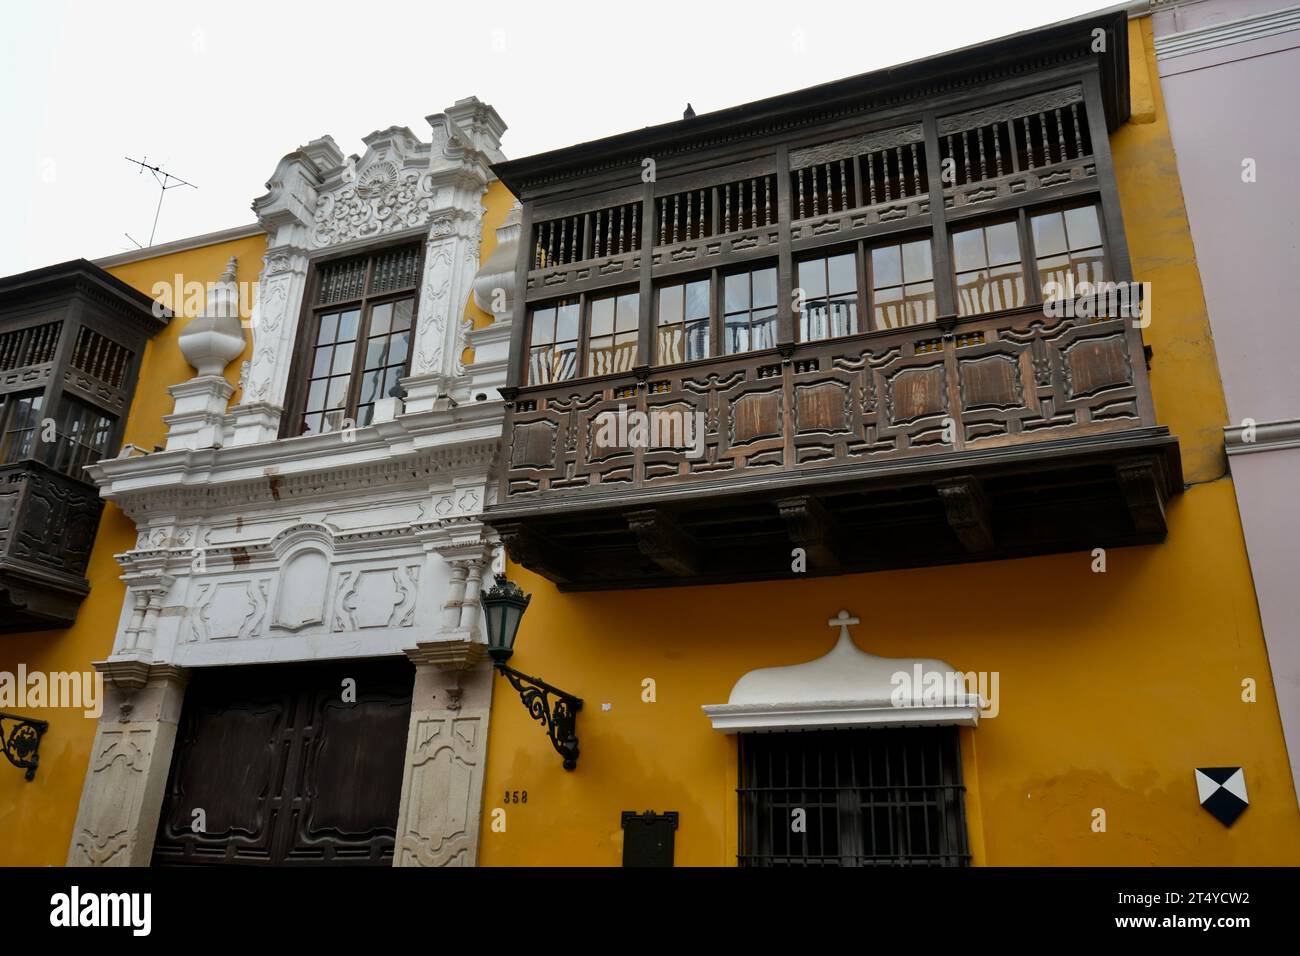 Traditional Carved wooden balcony on a yellow building. Lima, Peru. Stock Photo